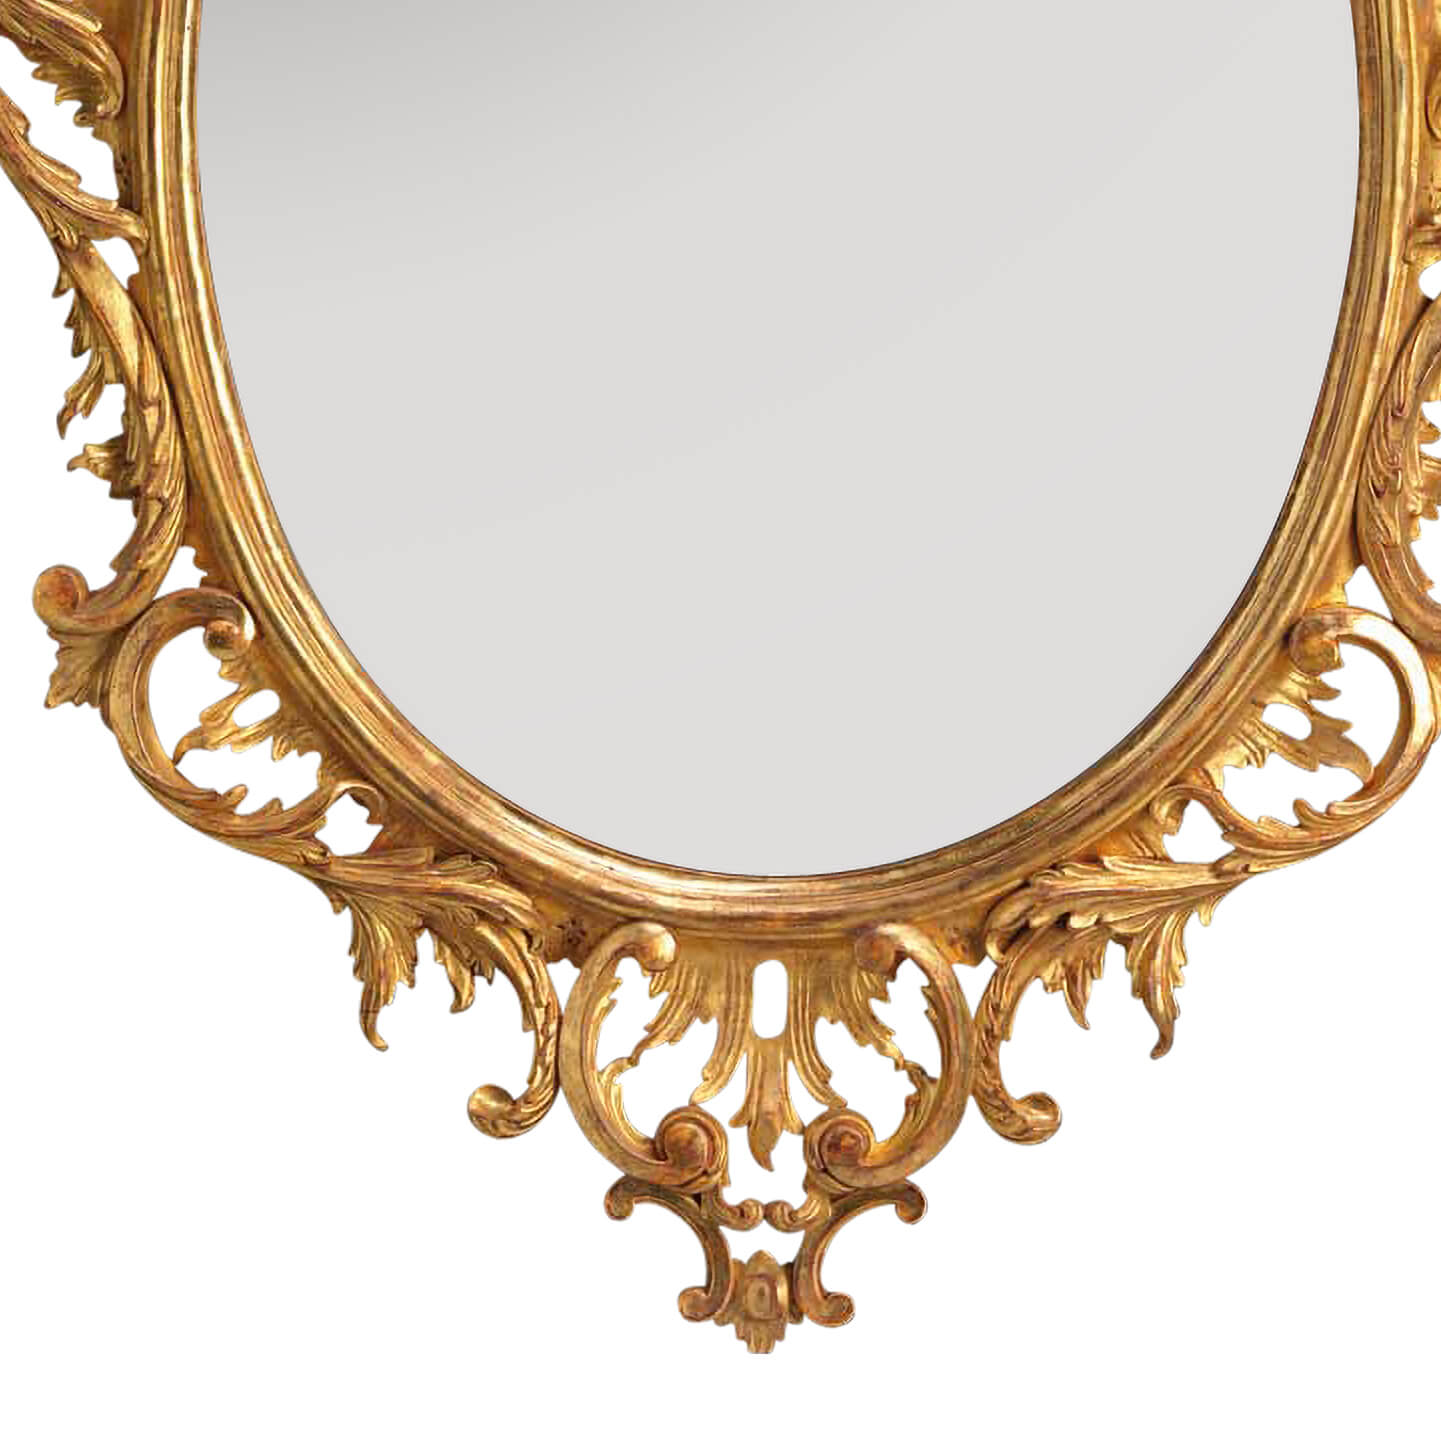 Traditional Chippendale Oval Mirror - English Georgian America